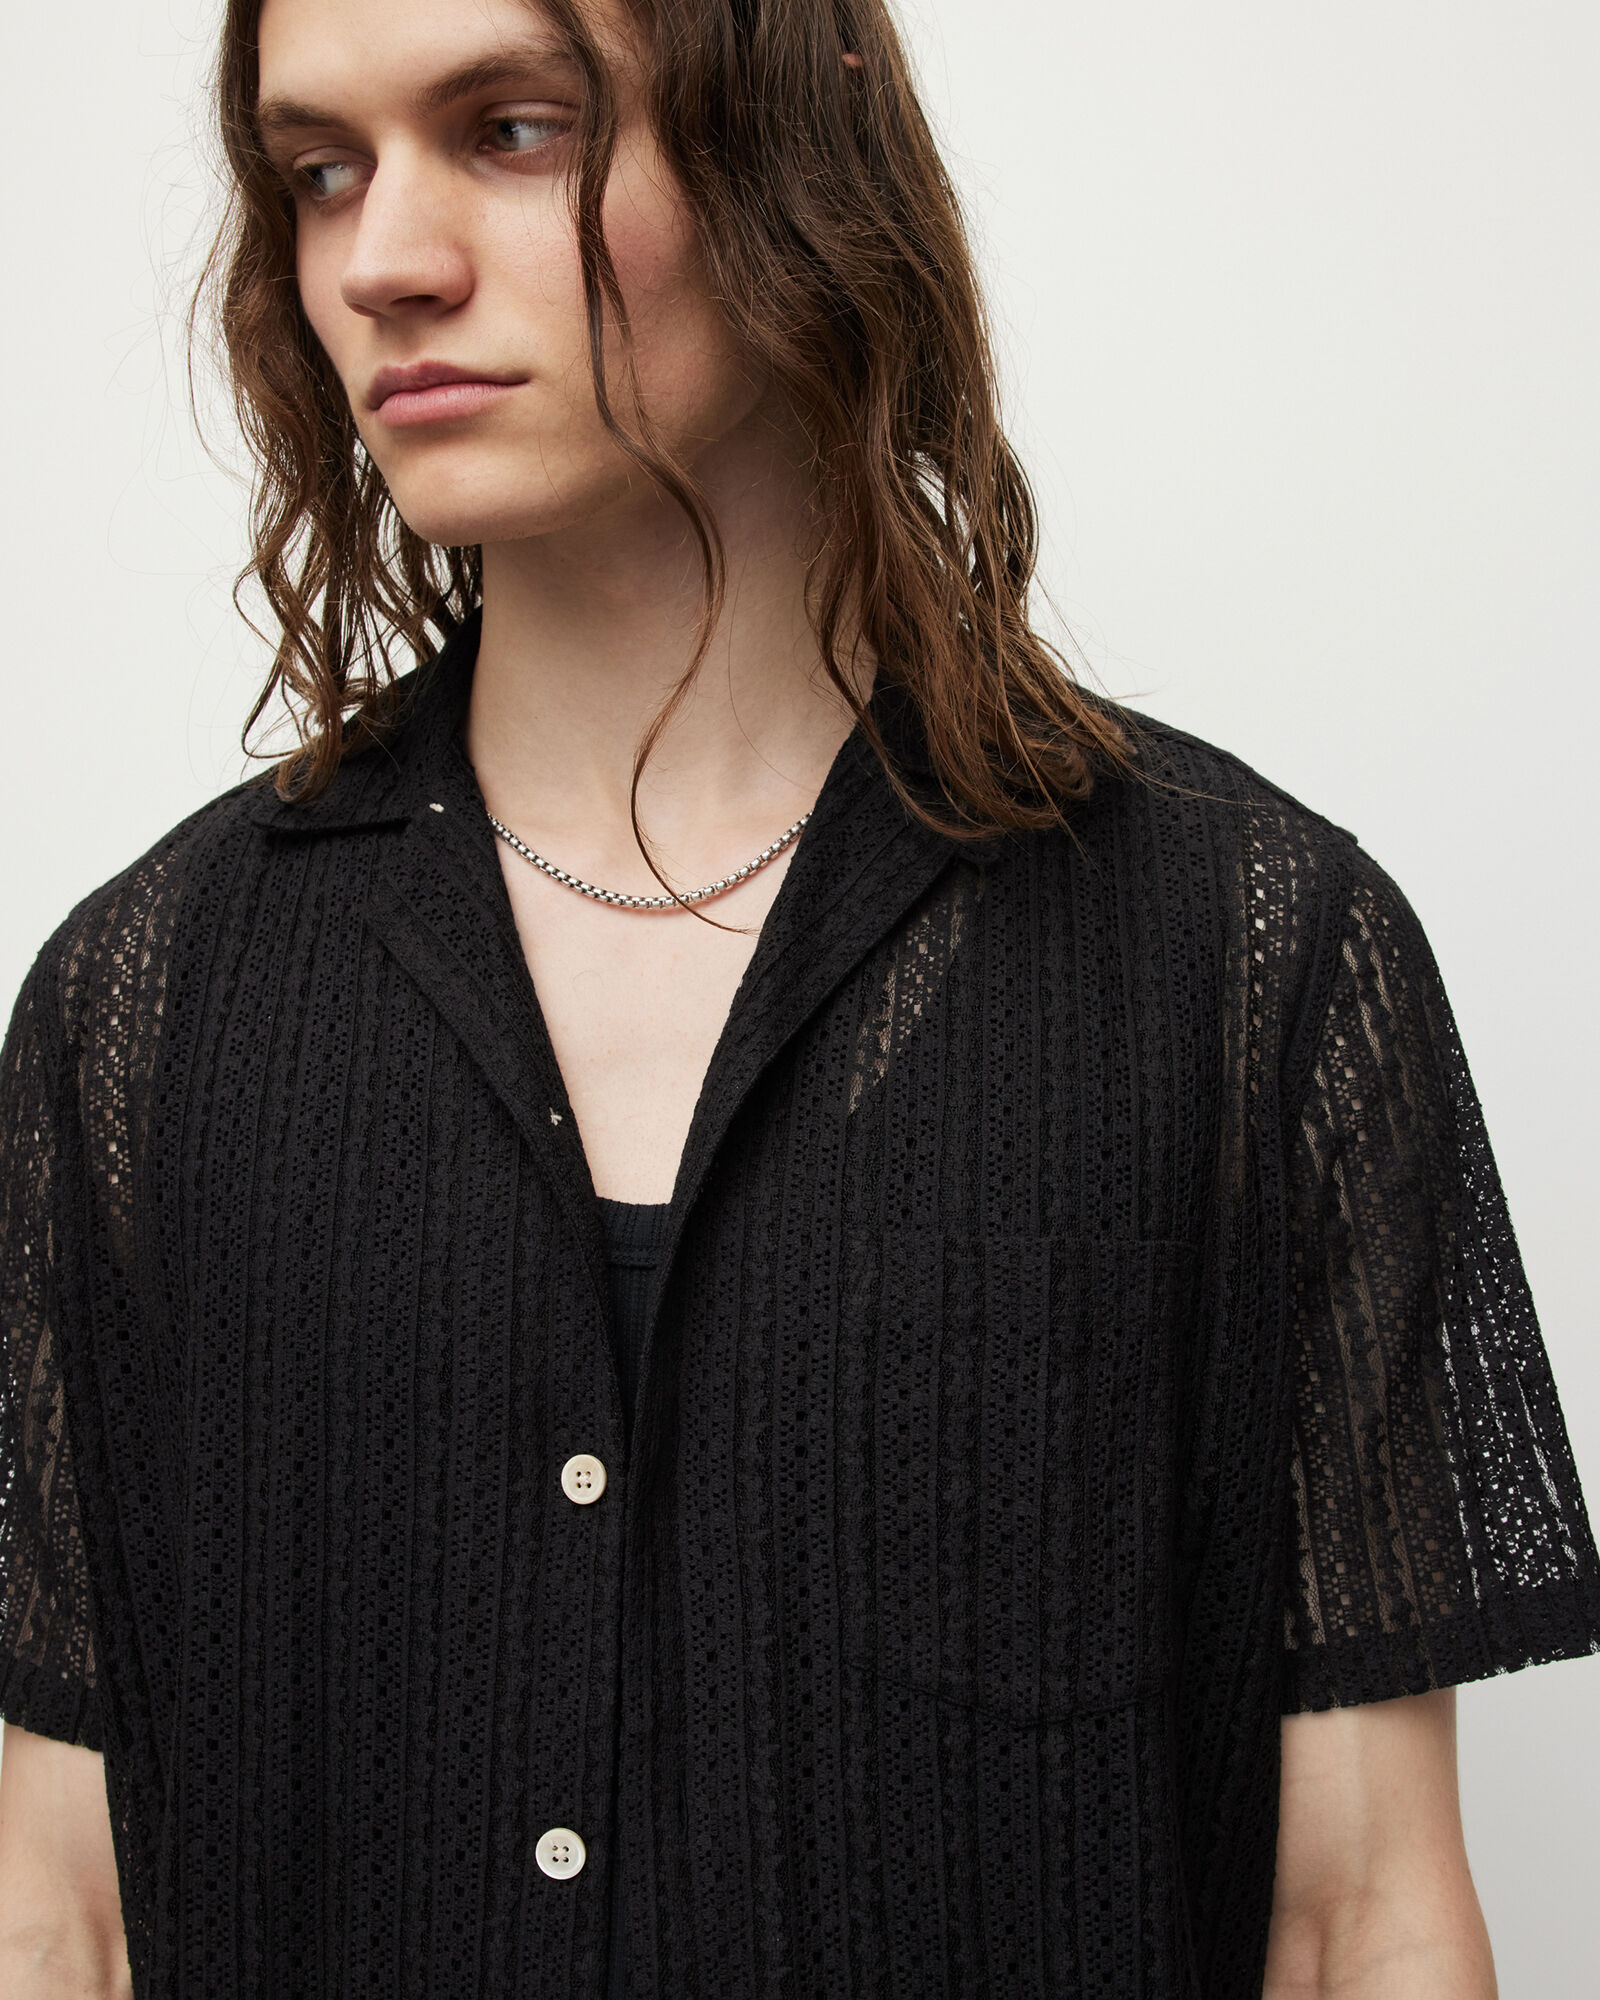 Cala Floral Lace Sheer Relaxed Shirt Jet Black | ALLSAINTS